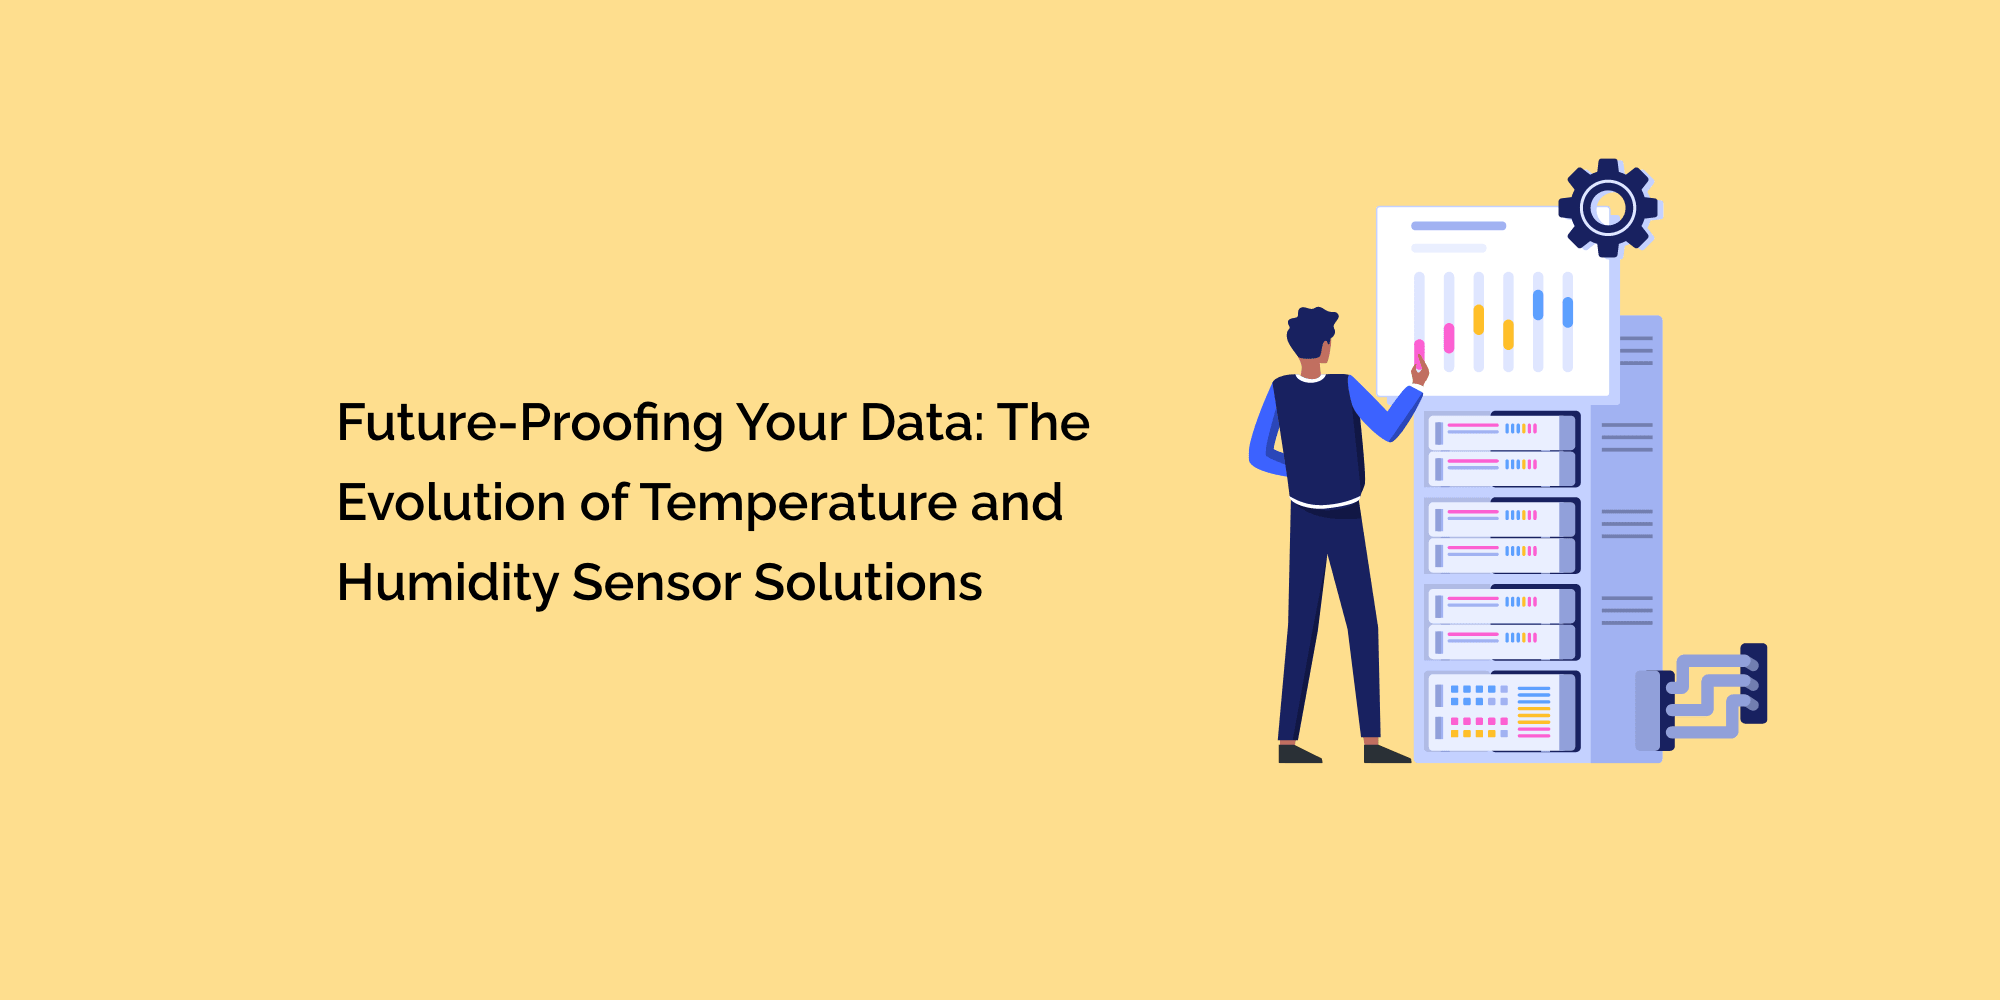 Future-Proofing Your Data: The Evolution of Temperature and Humidity Sensor Solutions